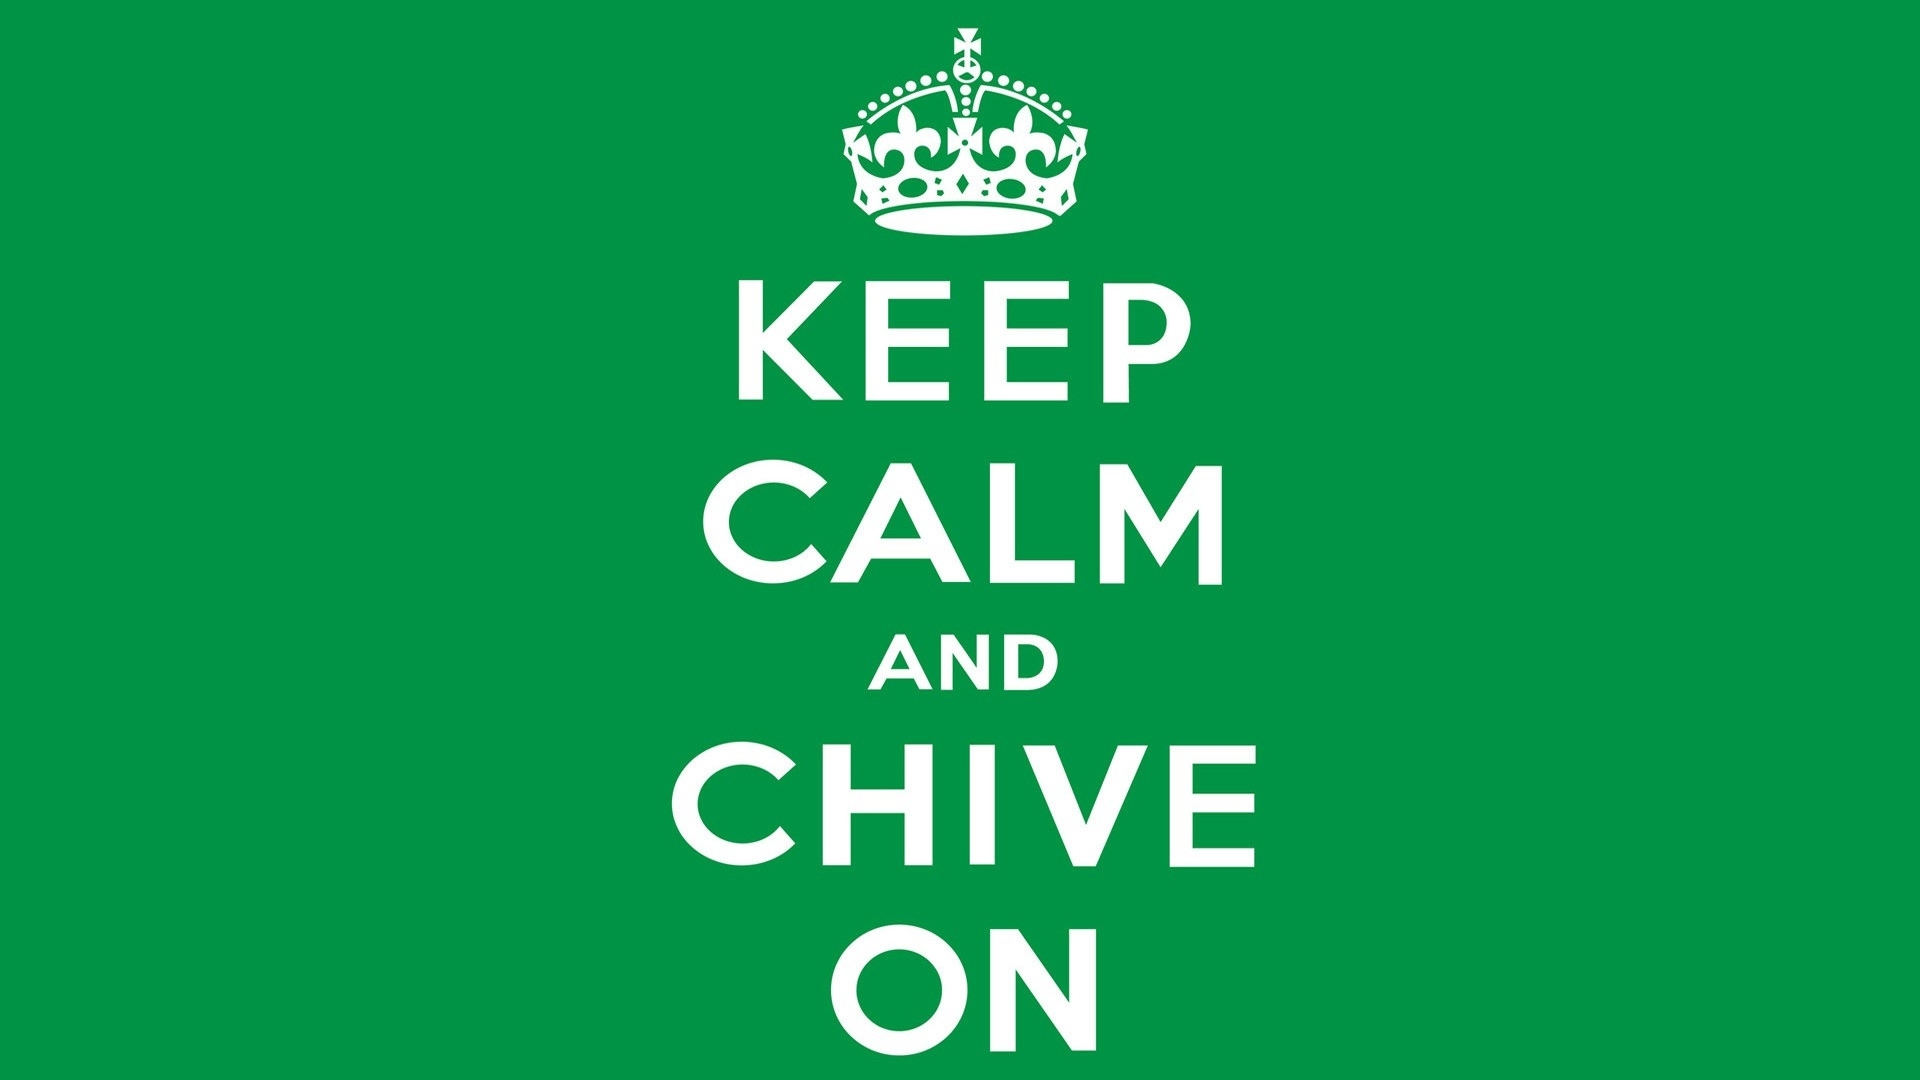 quotes keep calm and simple background green background kcco the chive